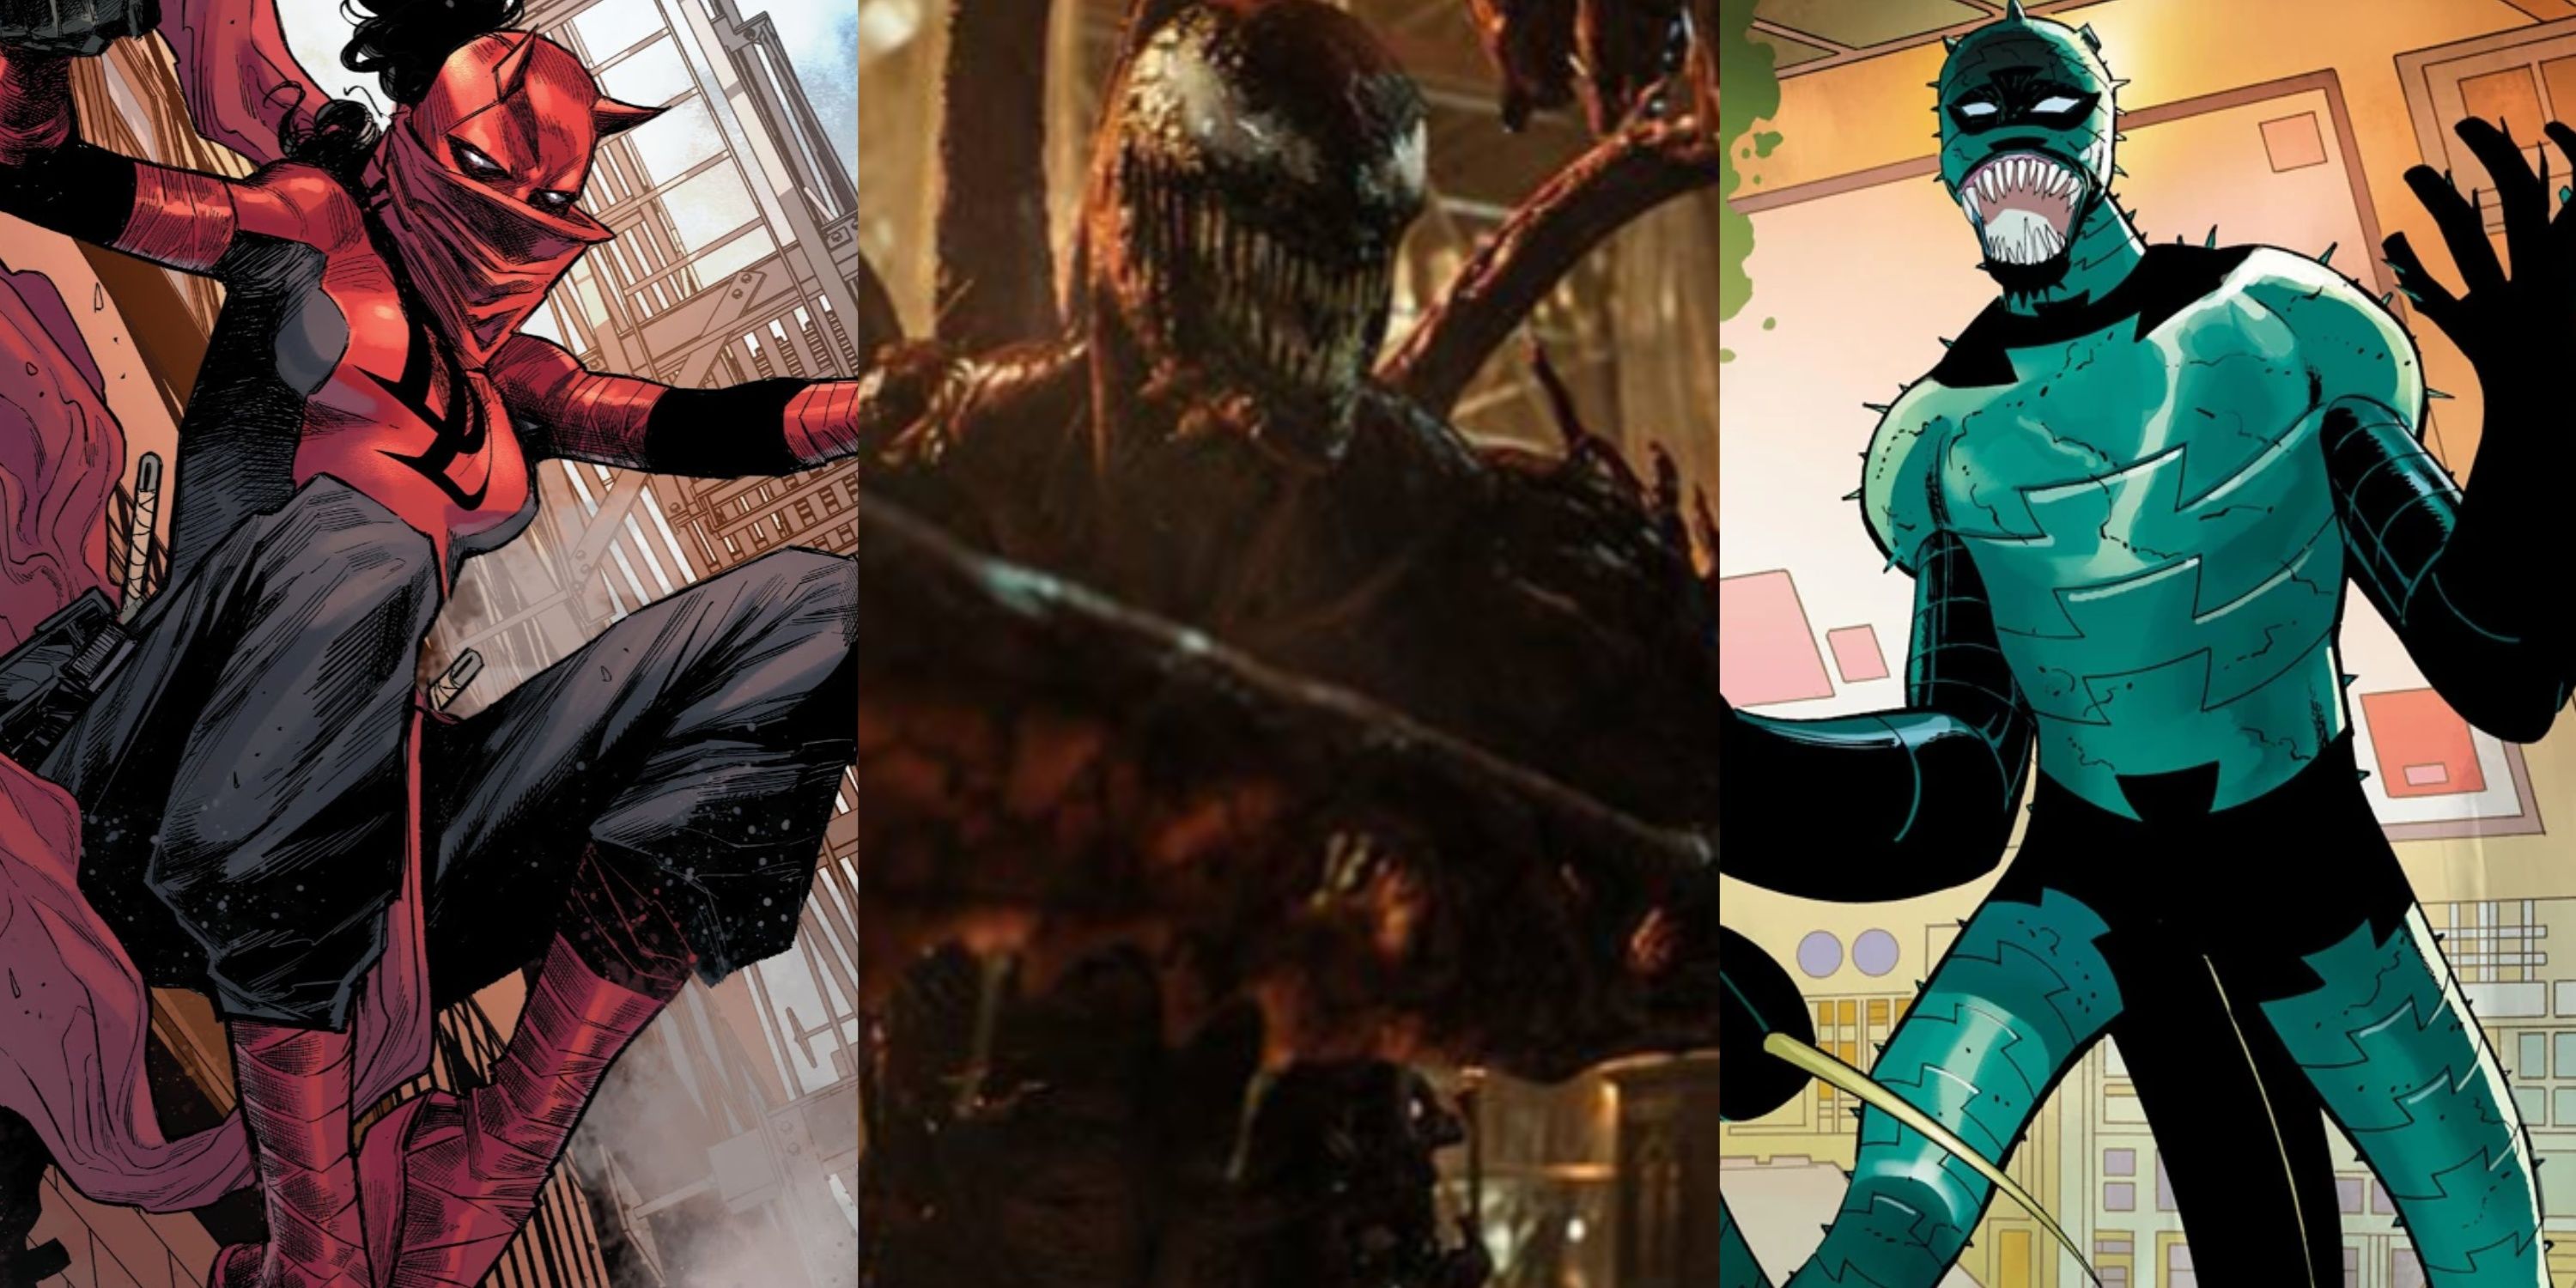 Split image of Elektra, Carnage from the Venom movie and Scorpion in Marvel Comics